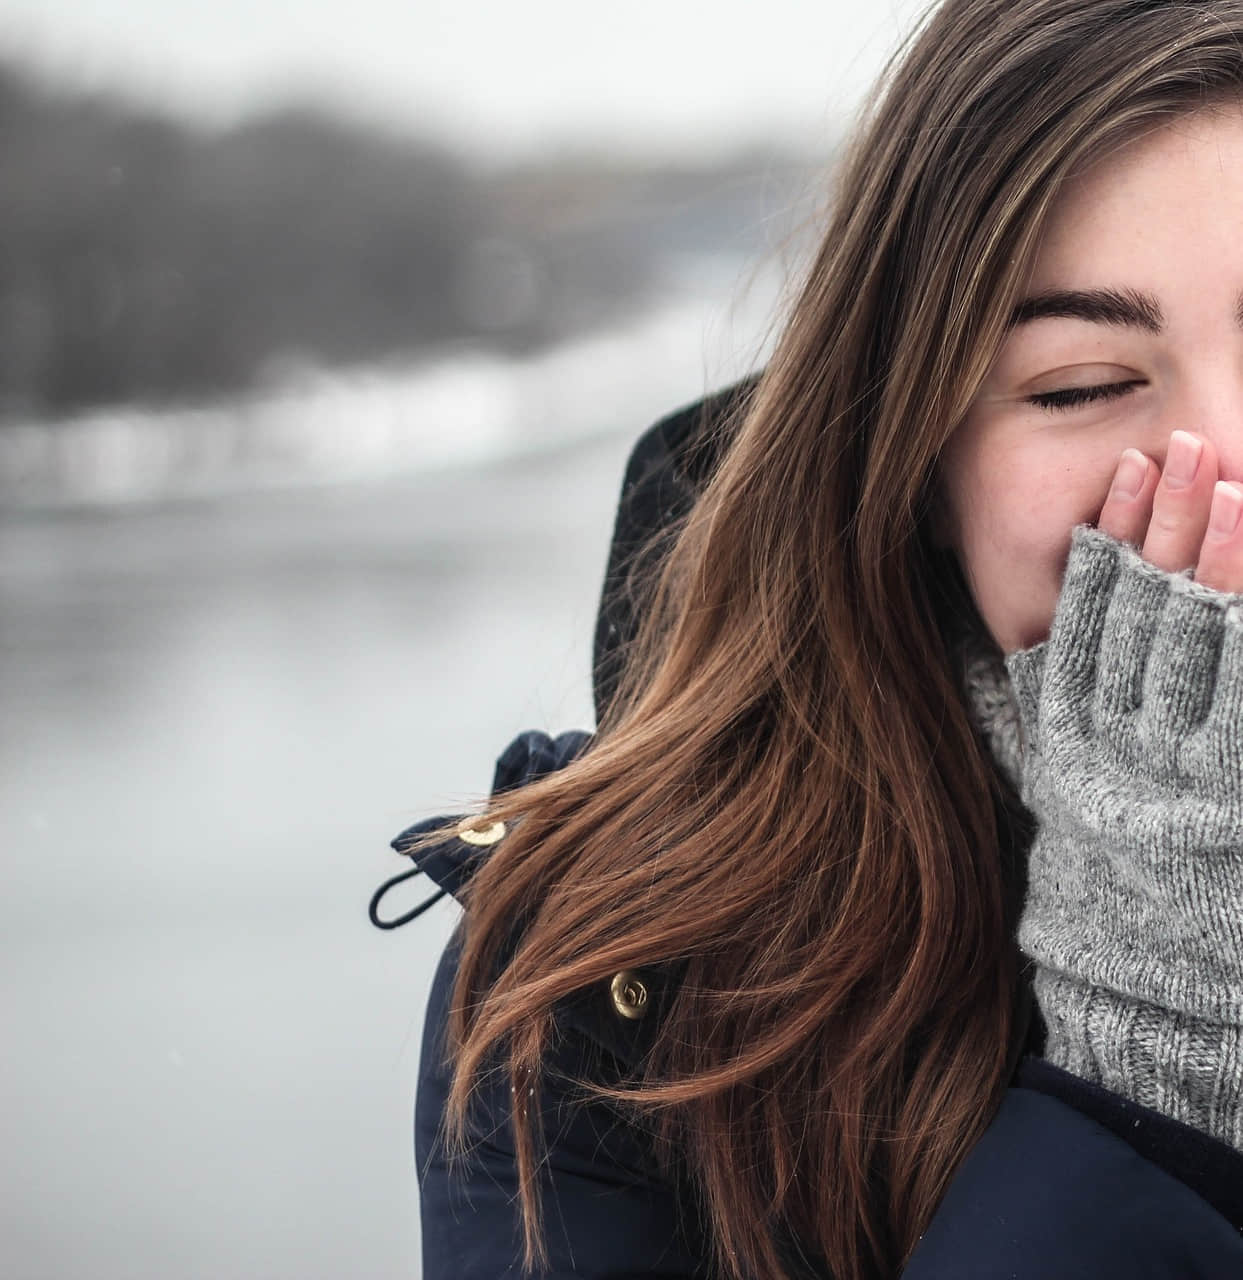 Discover the Warmest Winter Gloves for Ultimate Comfort